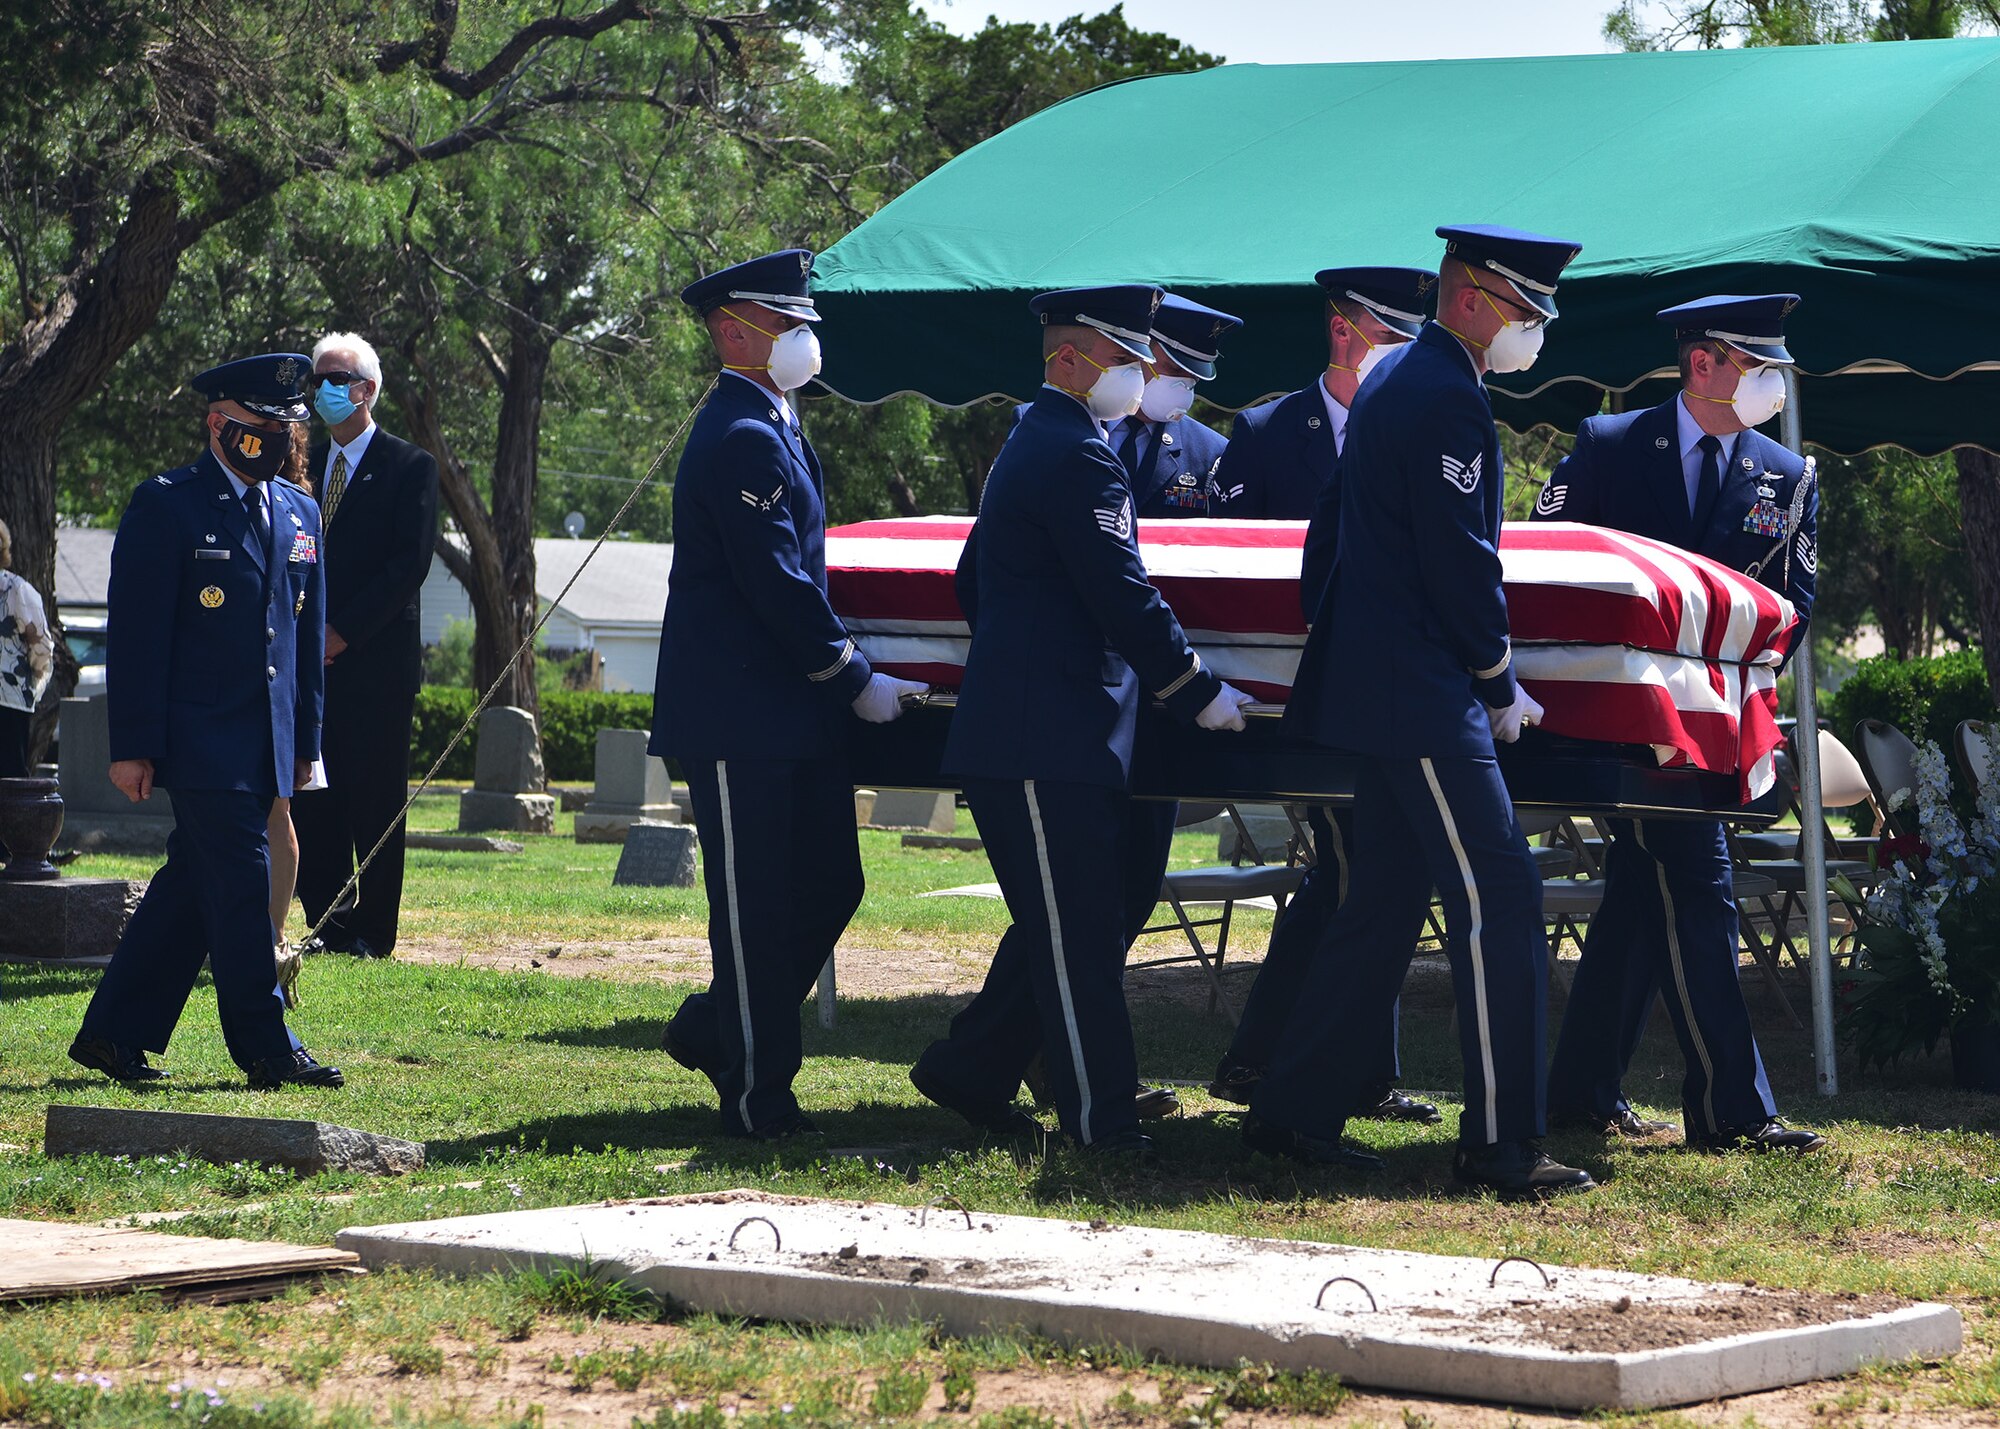 U.S. Air Force Col Andres Nazario, 17th Training Wing commander, follows behind honor guard members during retired Col. Charles Powell’s funeral at the Fairmont Cemetery, San Angelo Texas, July 8, 2020. Powell served as the Goodfellow commander from 1980 to 1984 and remained in the area until passing.(U.S. Air Force photo by Staff Sgt. Chad Warren)